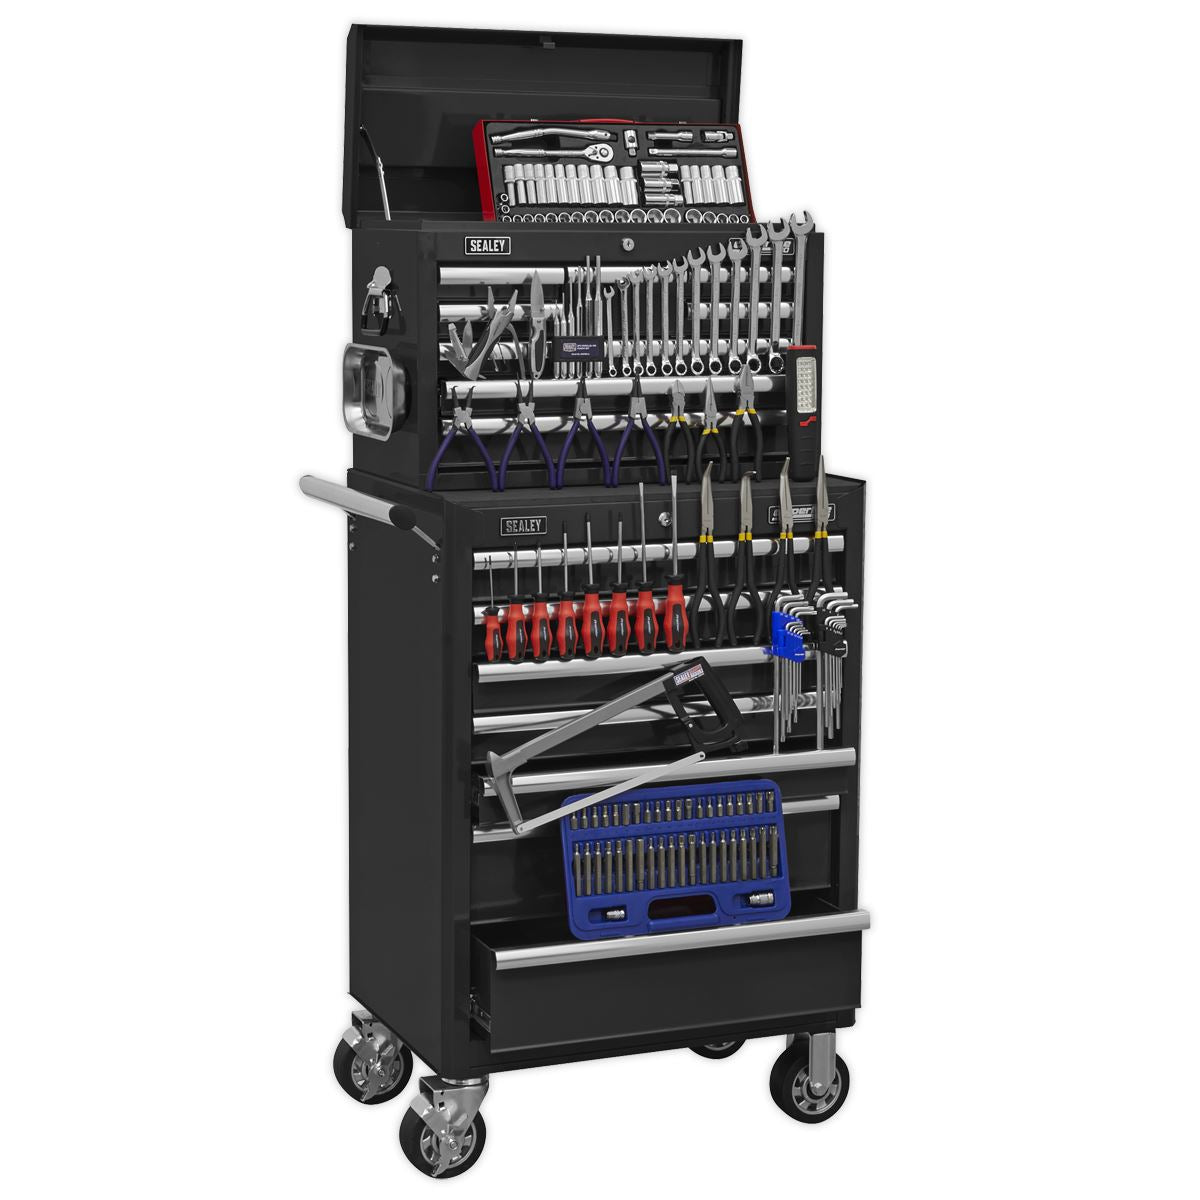 Sealey Superline Pro Topchest & Rollcab Combination 15 Drawer with Ball-Bearing Slides - Black & 148pc Tool Kit